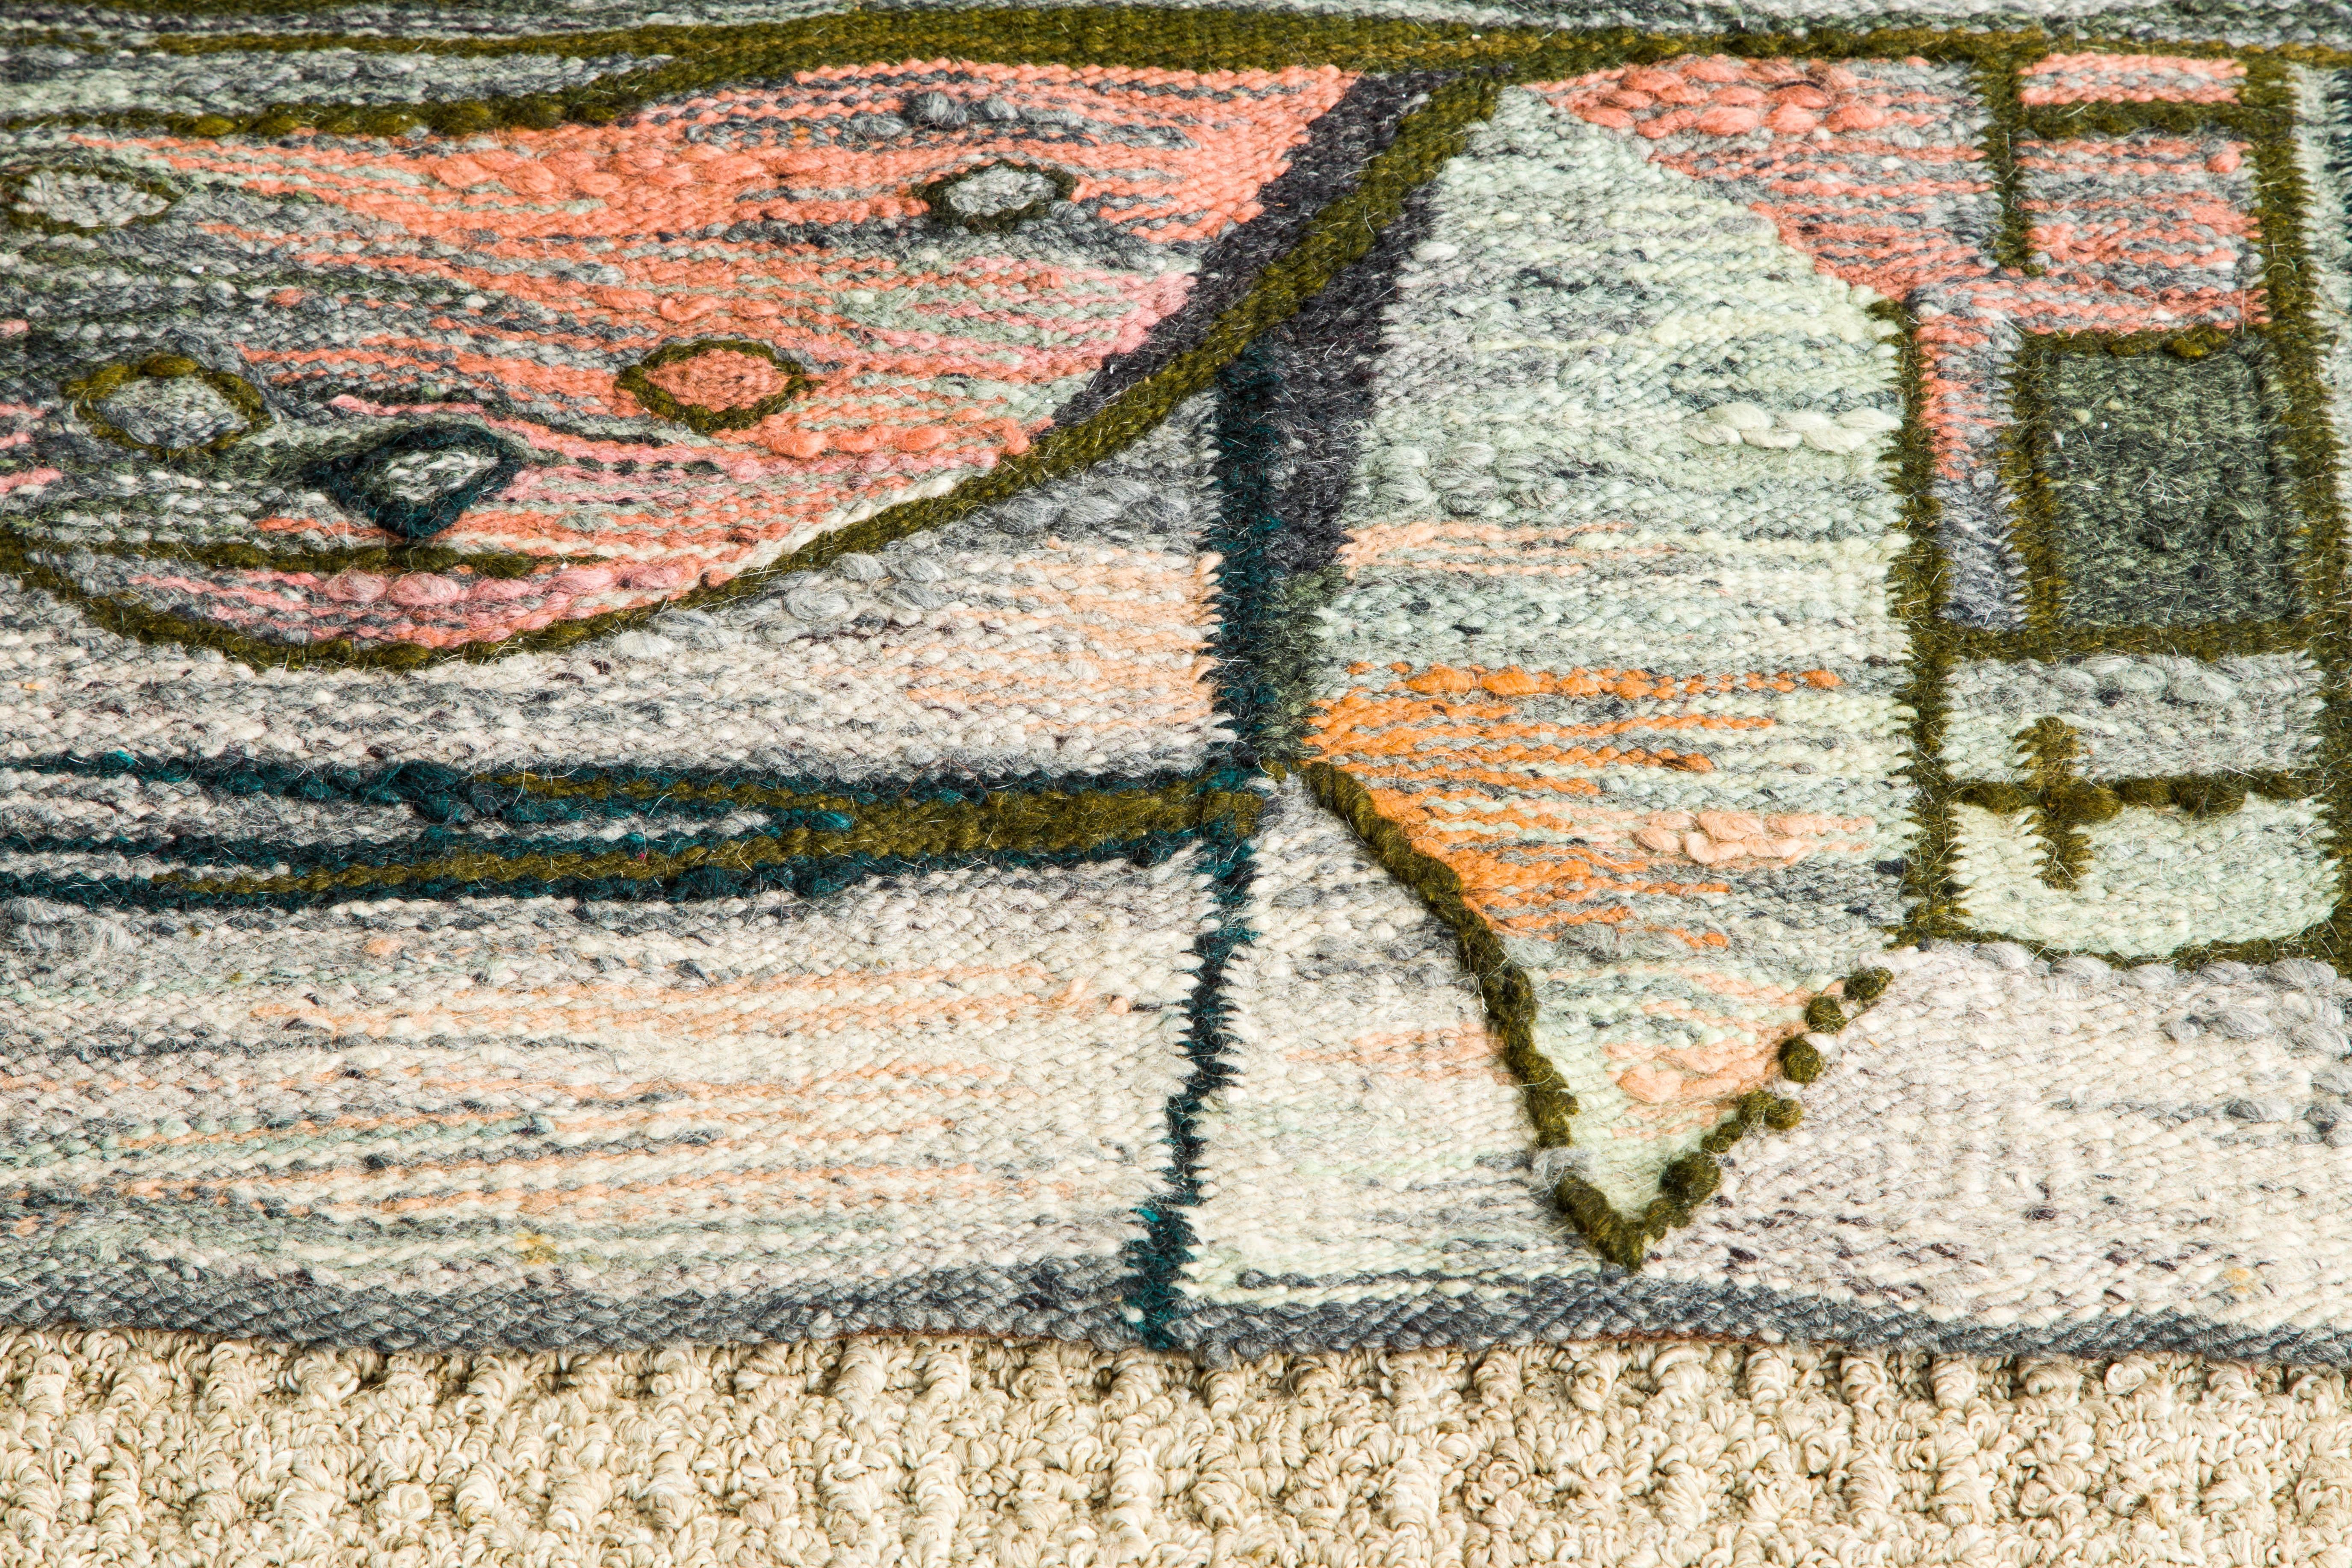 'A White Stream' Wool Tapestry or Rug by H. Sulkowska for Cepelia c 1960, Signed For Sale 6